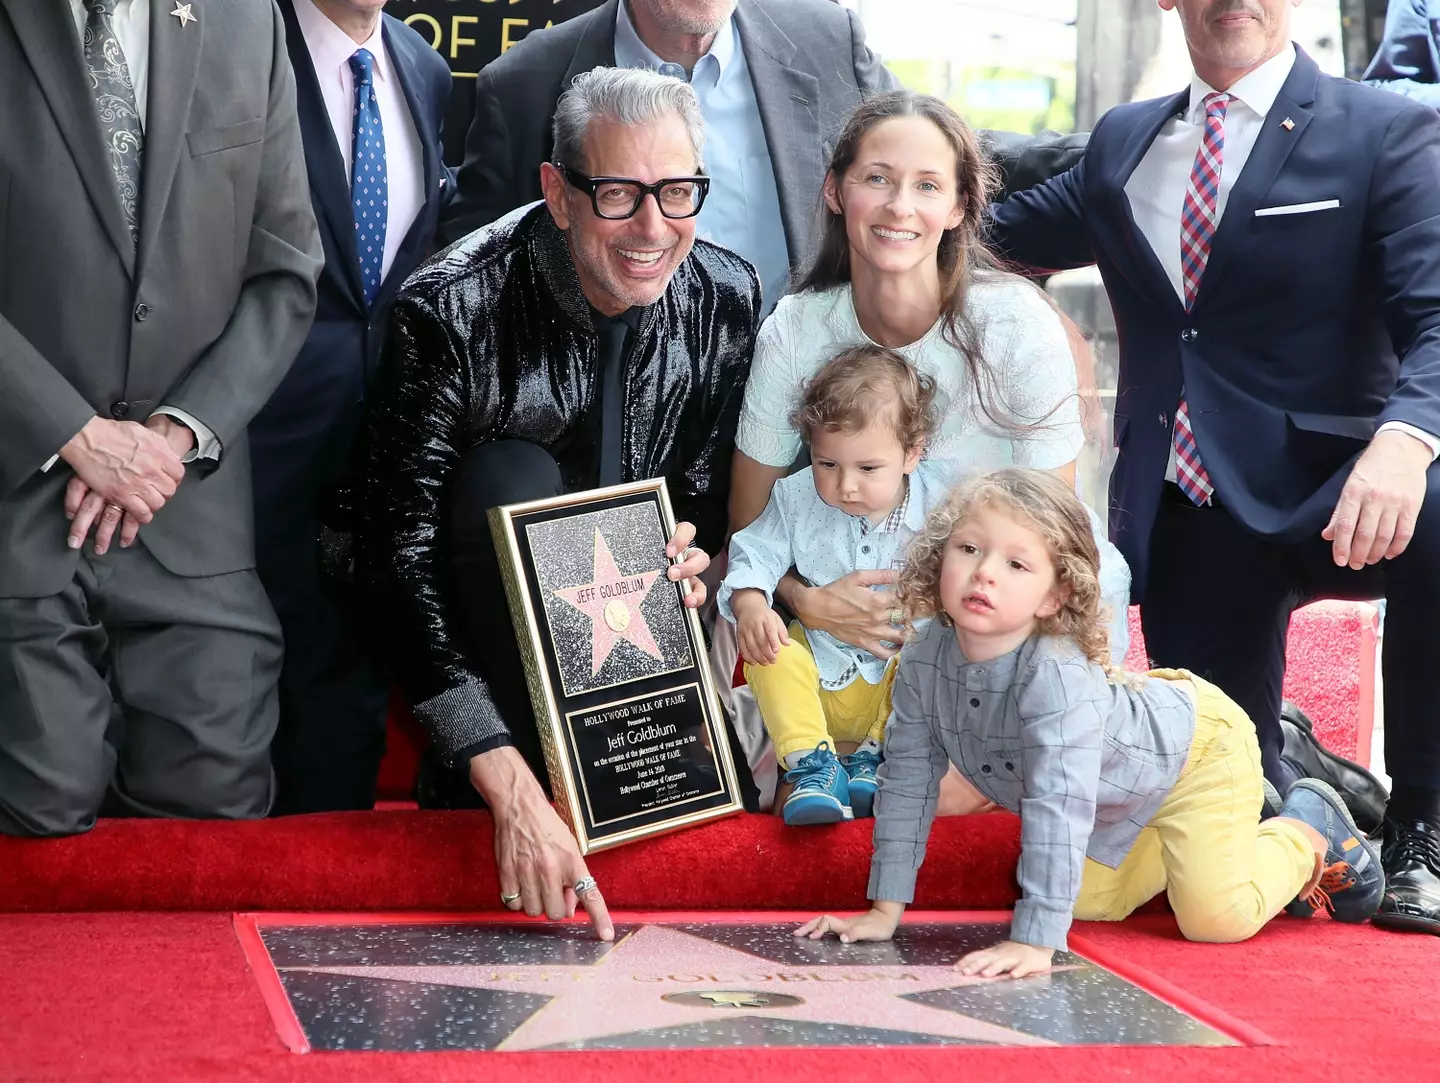 Jeff Goldblum with his wife and children in 2018. (David Livingston/Getty Images)